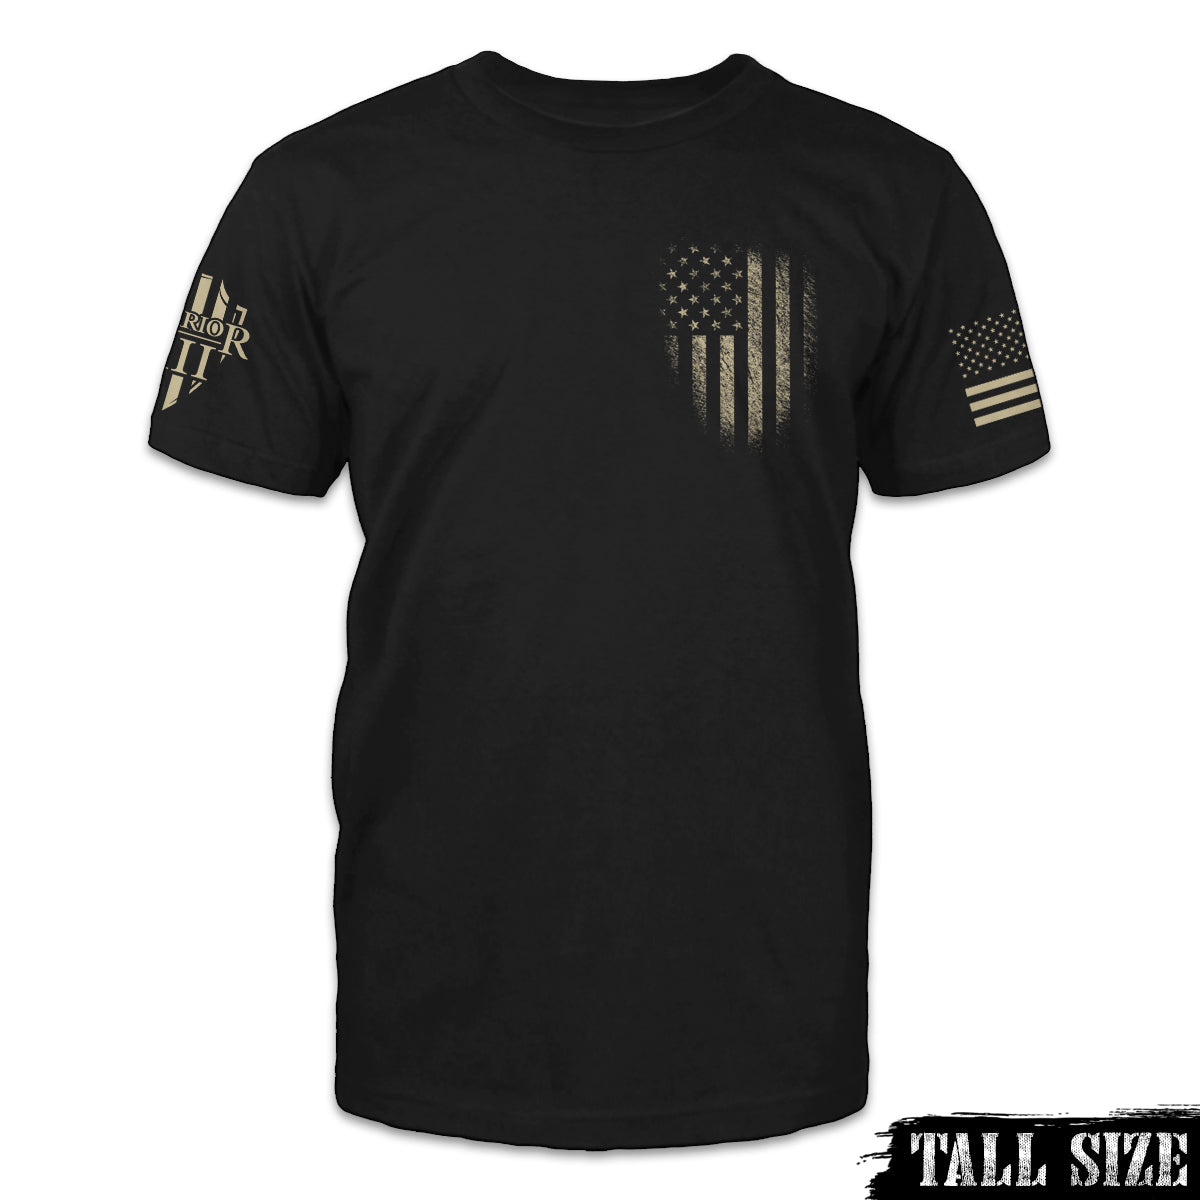 A black tall size shirt with a USA flag emblem printed on the front of the shirt.